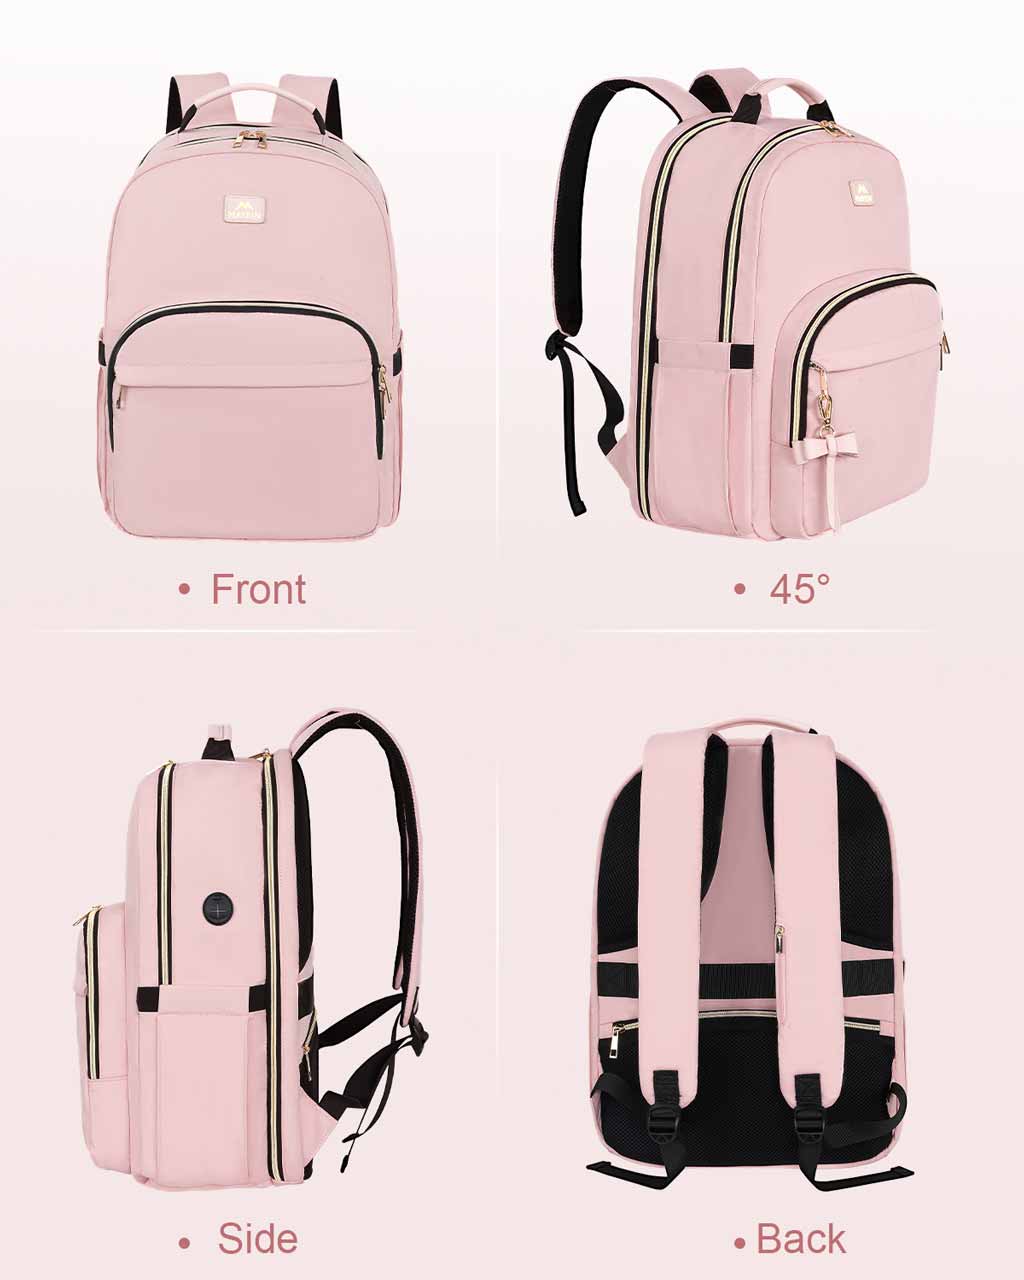 Matein Pink Backpack for Airplane Travel